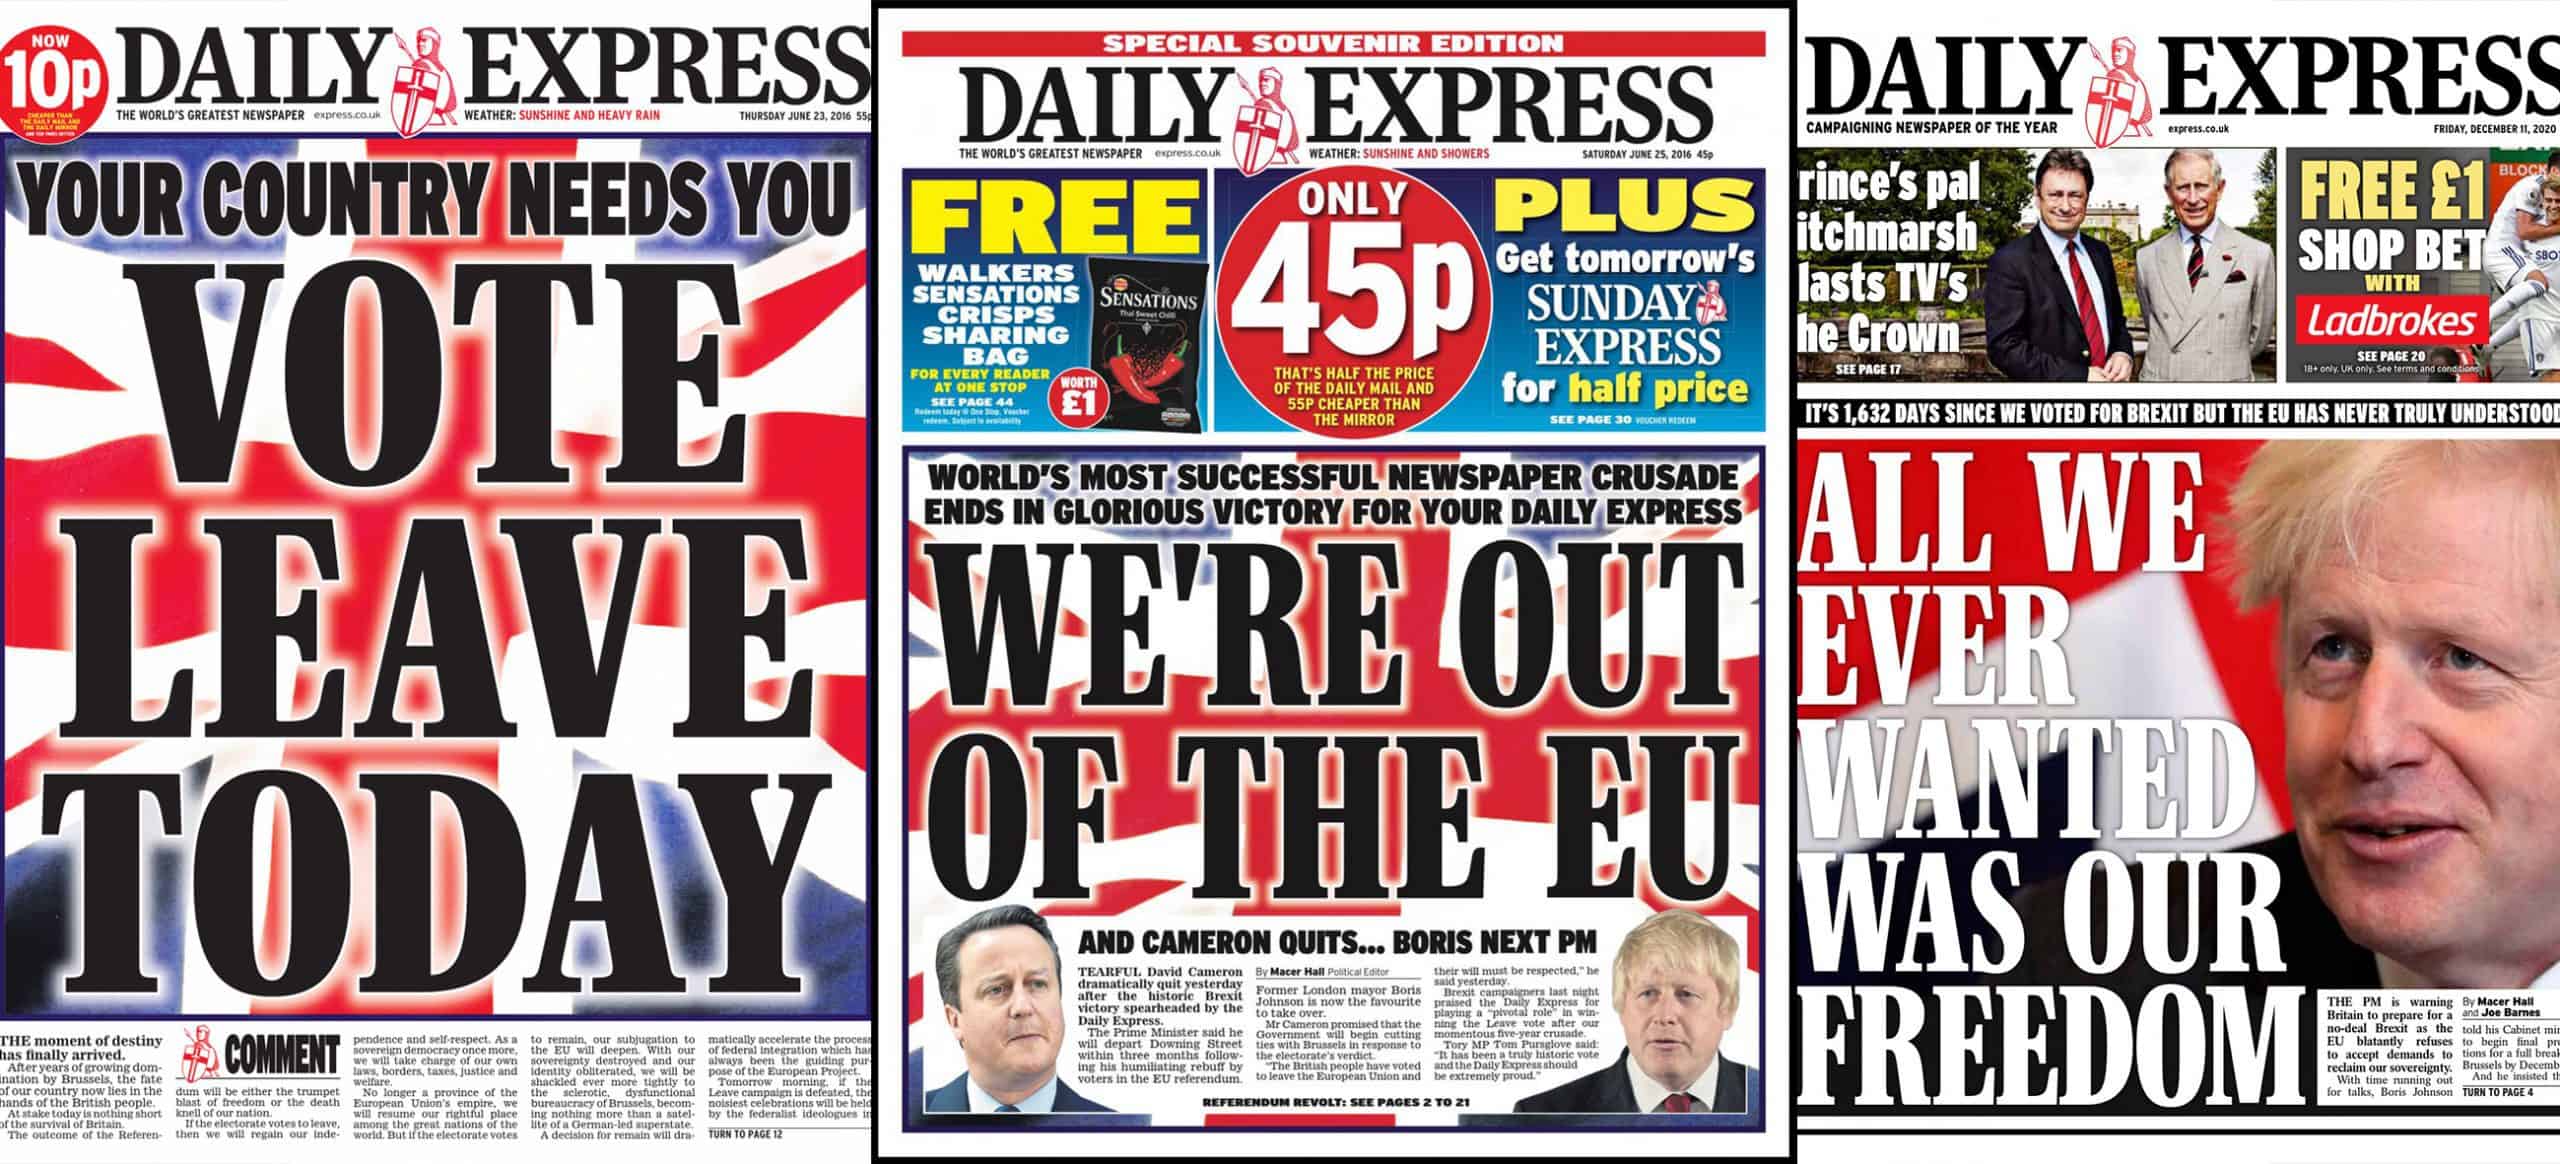 Daily Express whimpers: All we ever wanted was our freedom